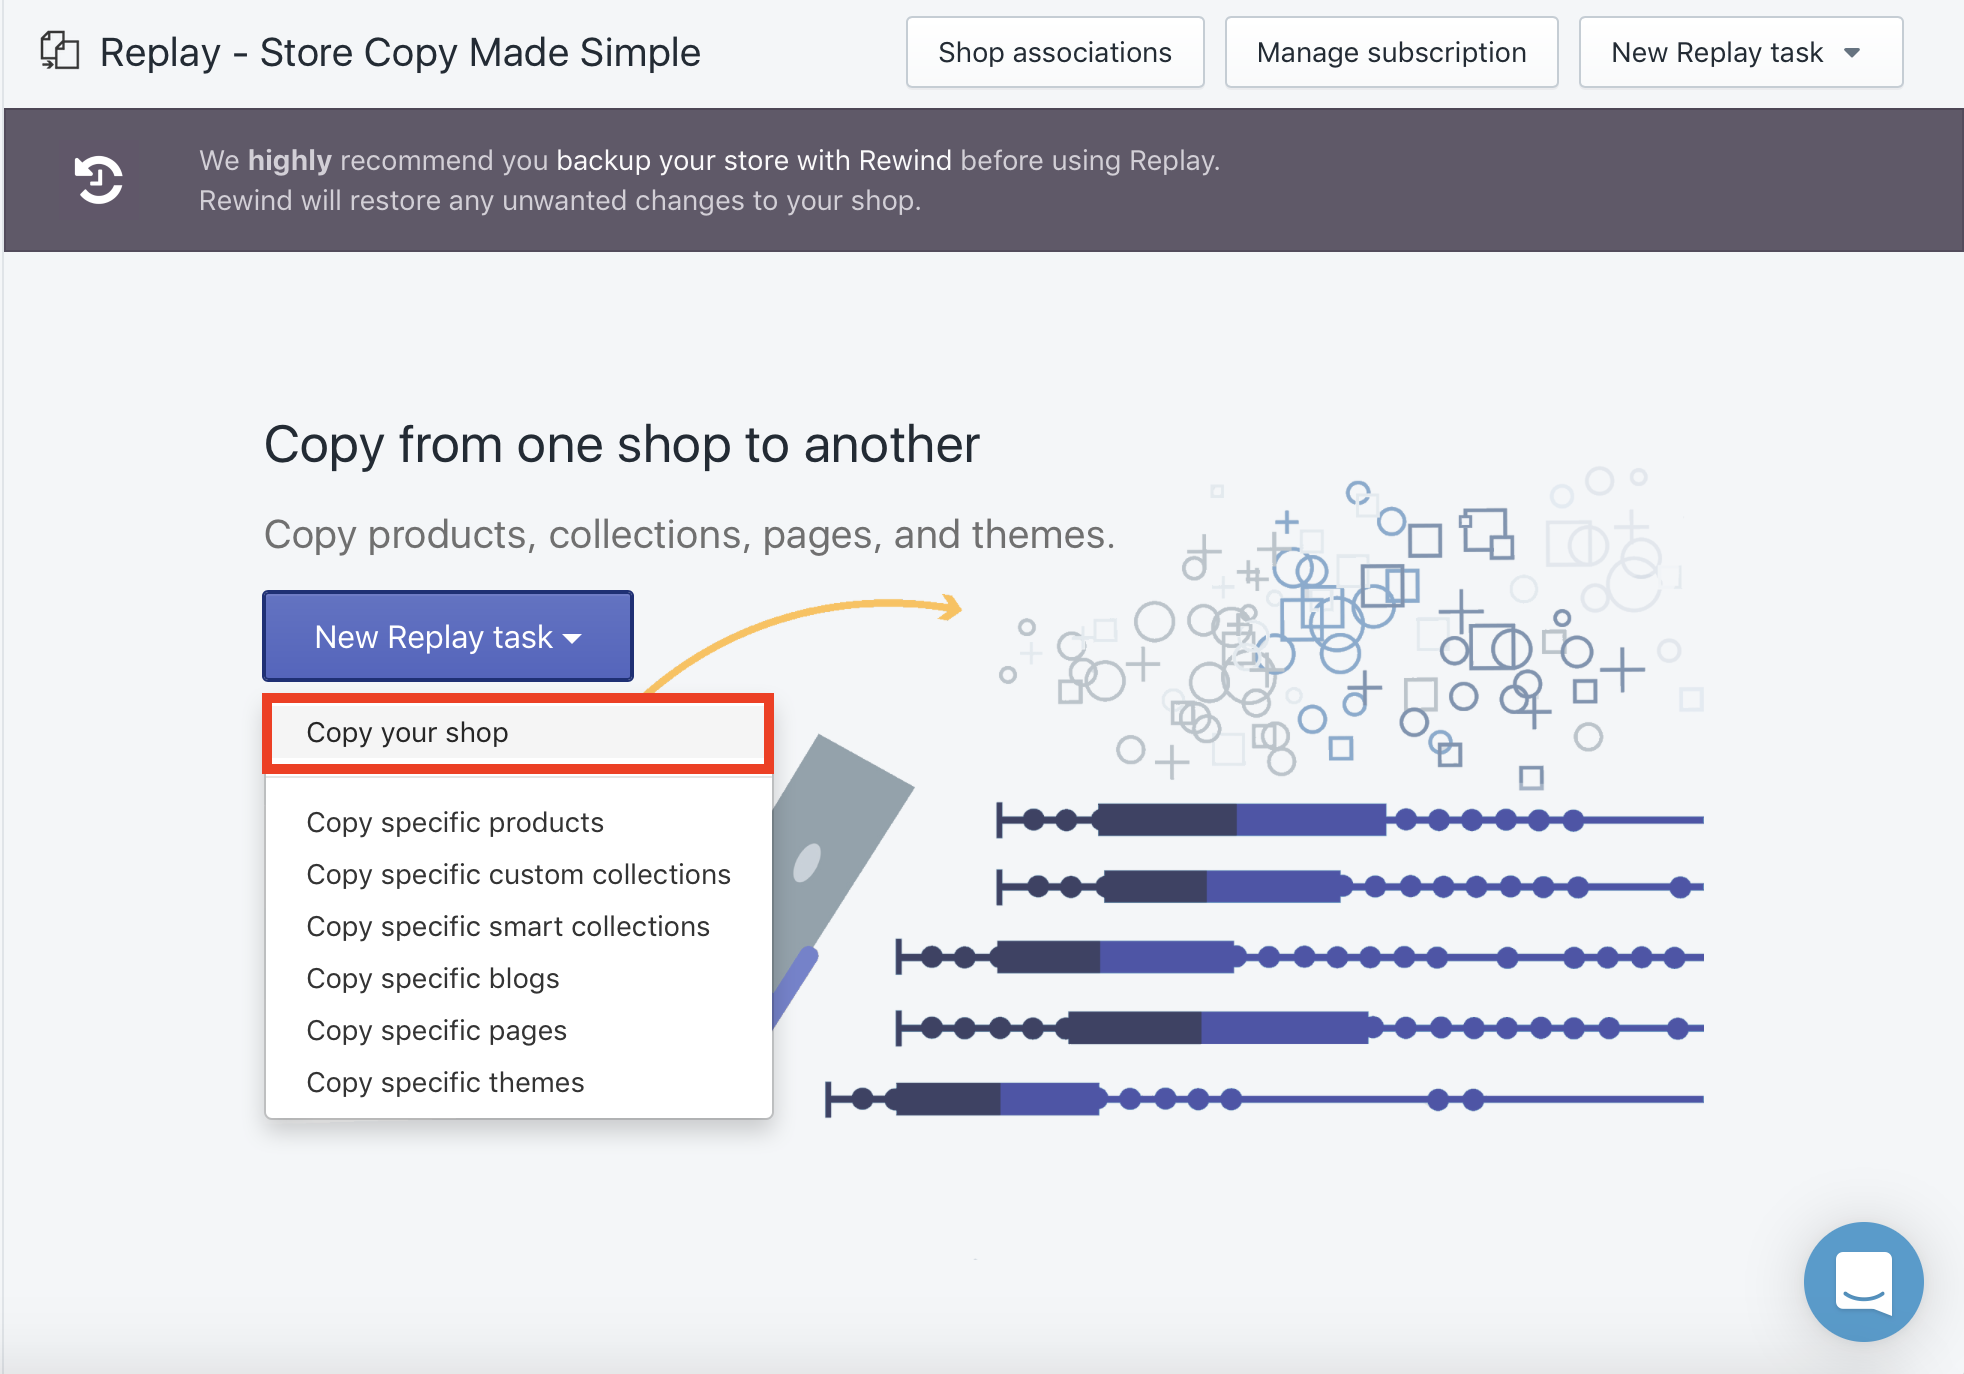 Copying your Shopify store using the Replay app is much more time-effective and flexible